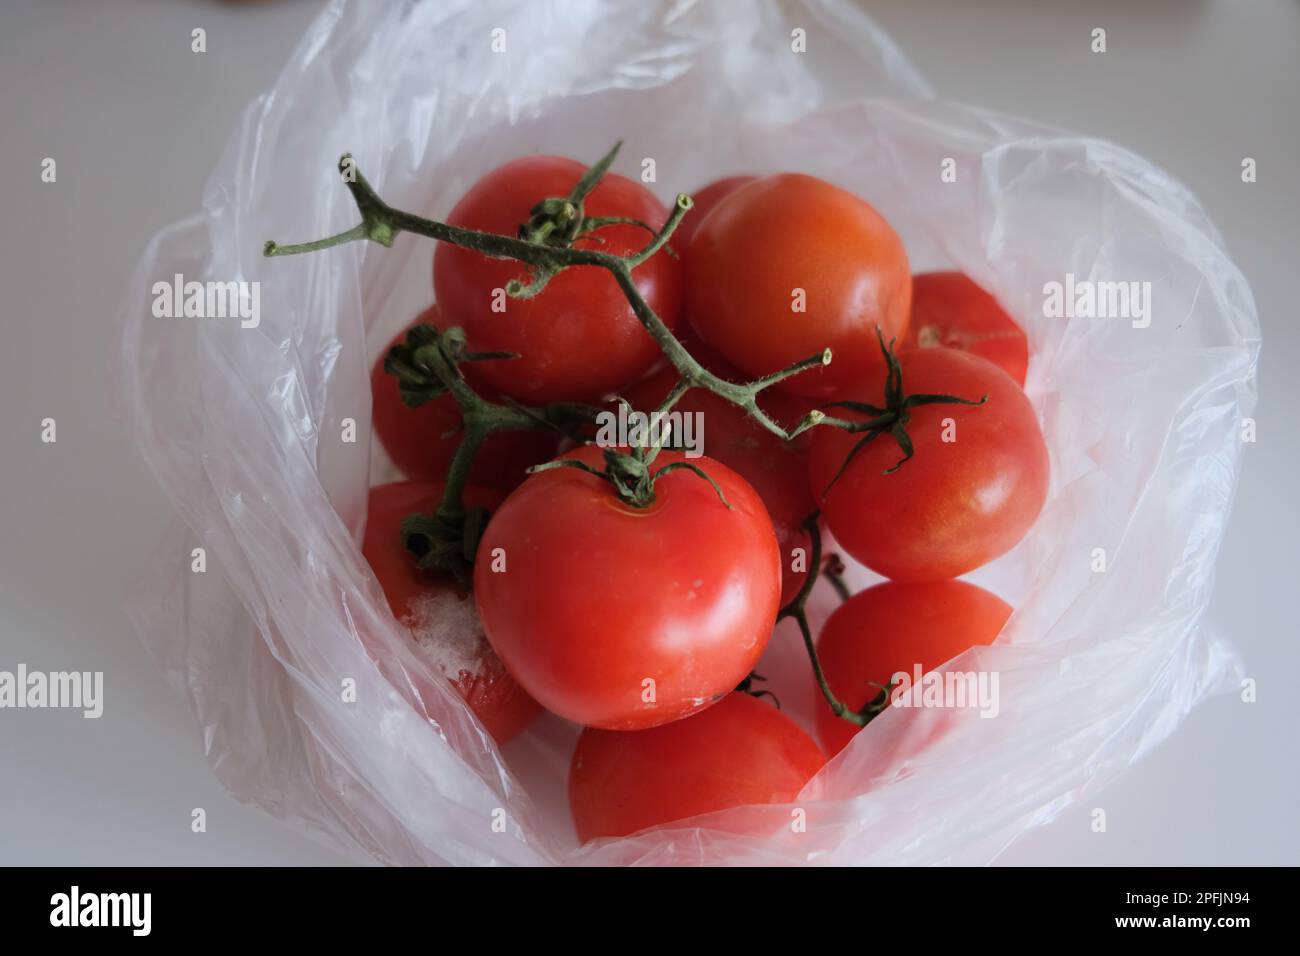 Some rotten tomatoes and some pristine tomatoes are in a transparent plastic bag on a white kitchen countertops. Stock Photo